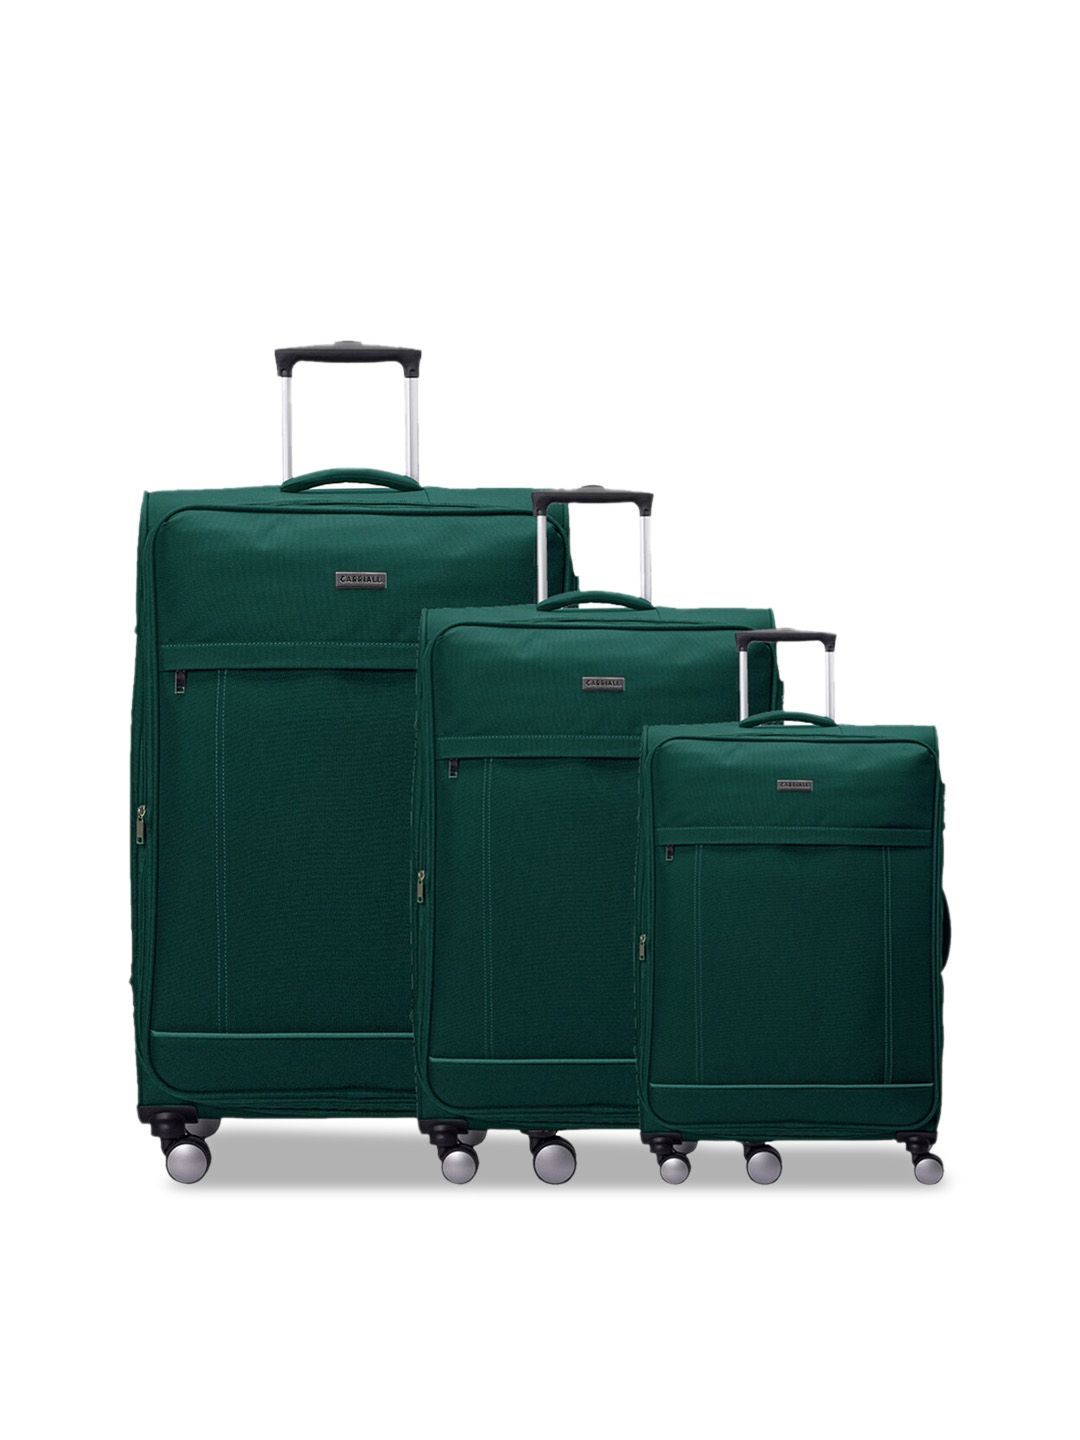 CARRIALL Set Of 3 Green Solid Soft-Sided Trolley Suitcases Price in India